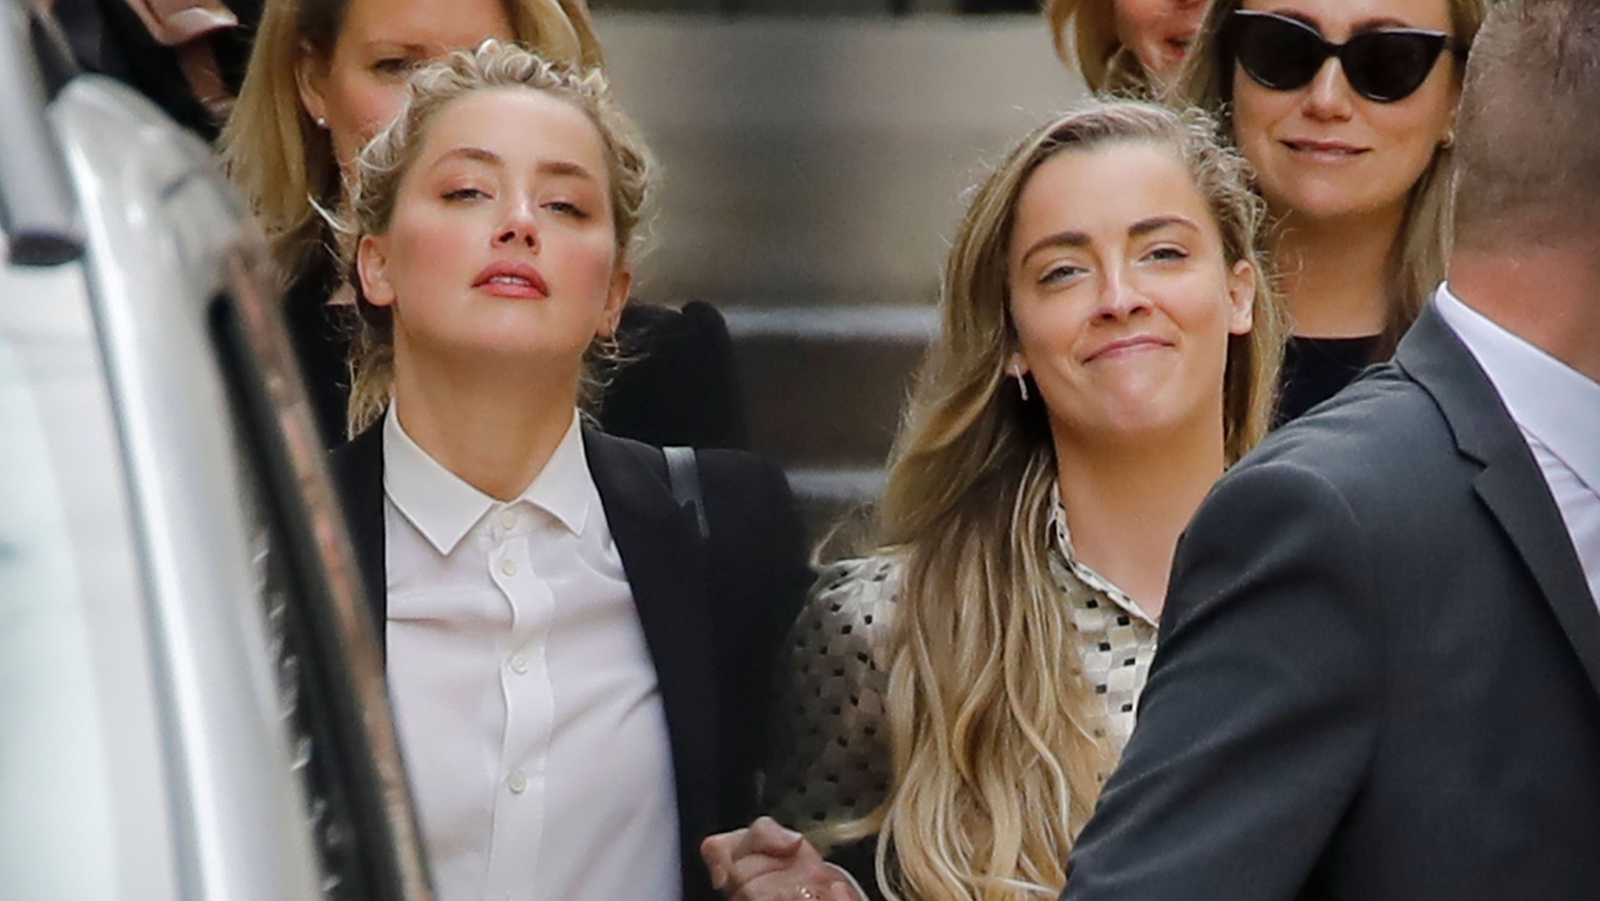 Amber Heard s sister quizzed over fight video